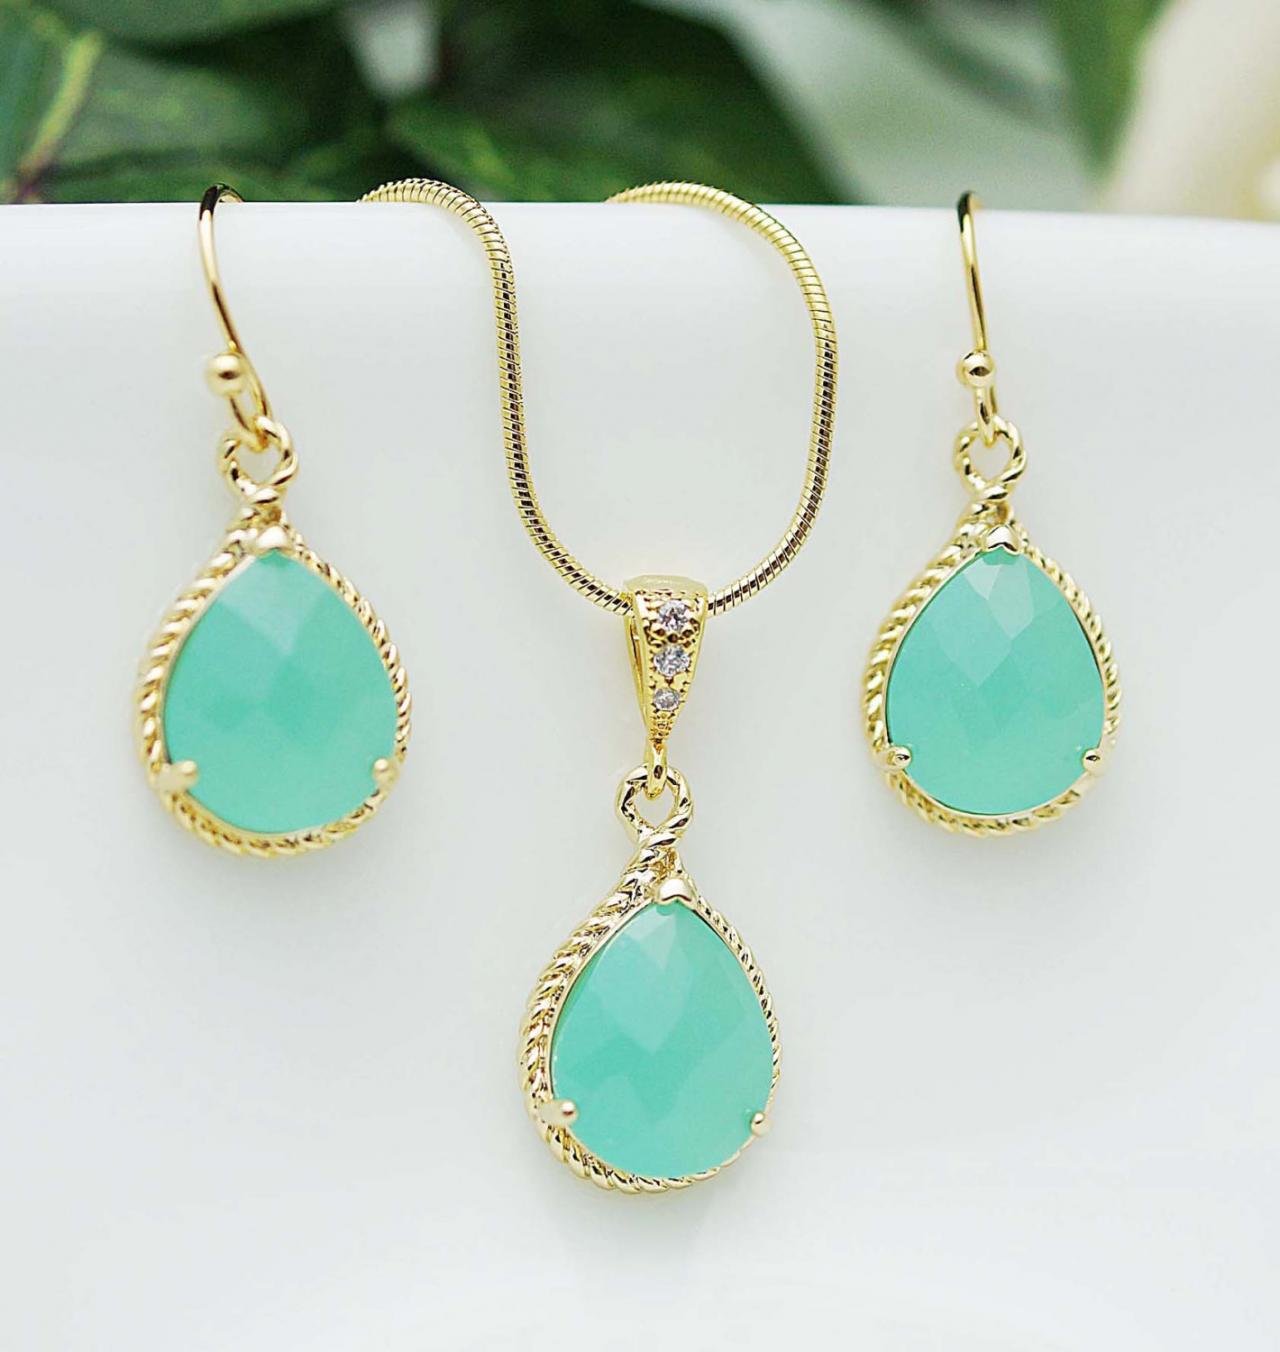 Wedding Jewelry Bridesmaid Jewelry Bridesmaid Earrings Bridesmaid Necklace Mint Opal Glass Gold Trimmed Pear Cut Bridesmaid gift